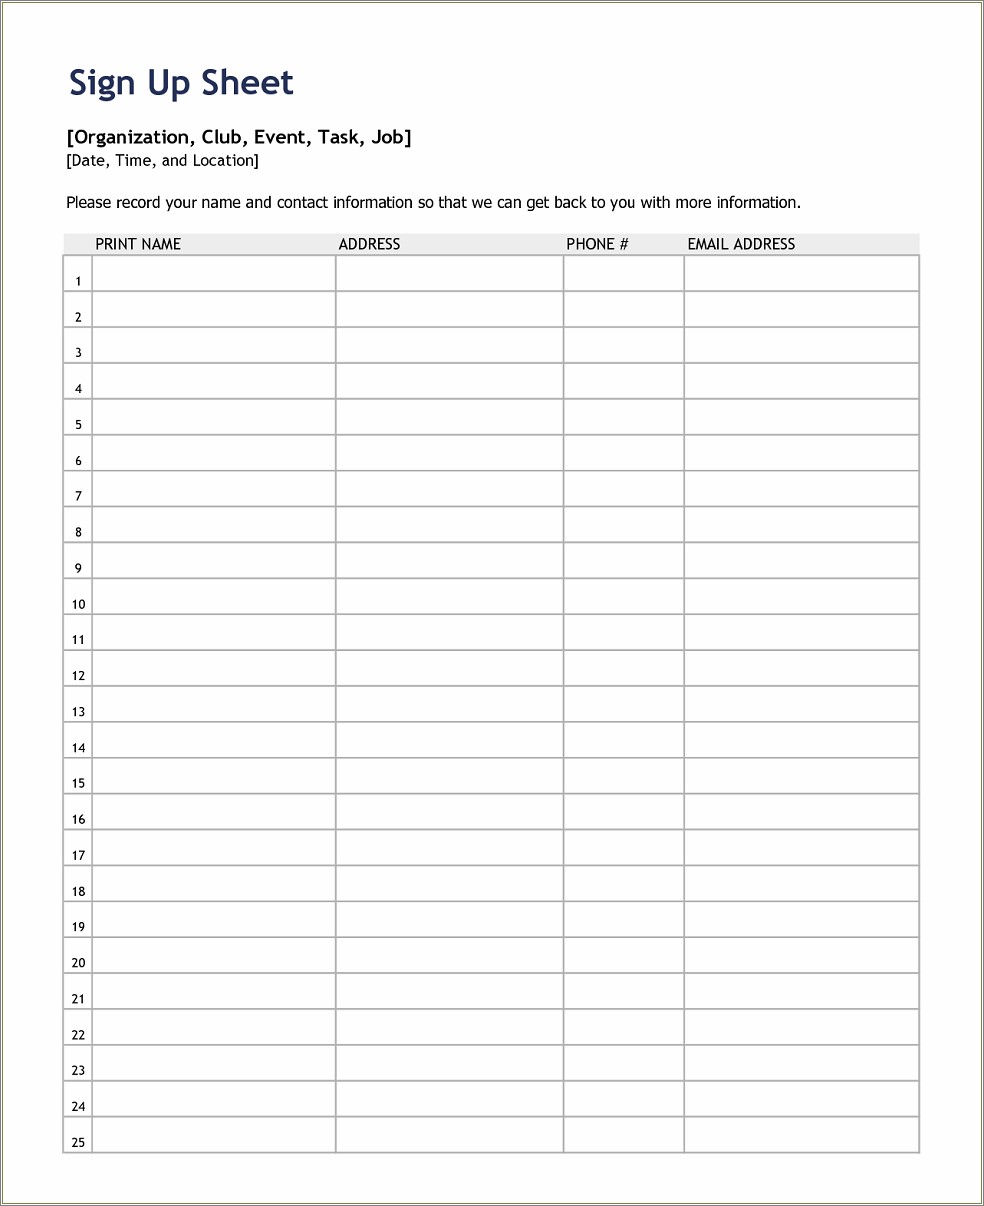 Halloween Potluck Sign Up Sheet Free Template - Resume Example Gallery